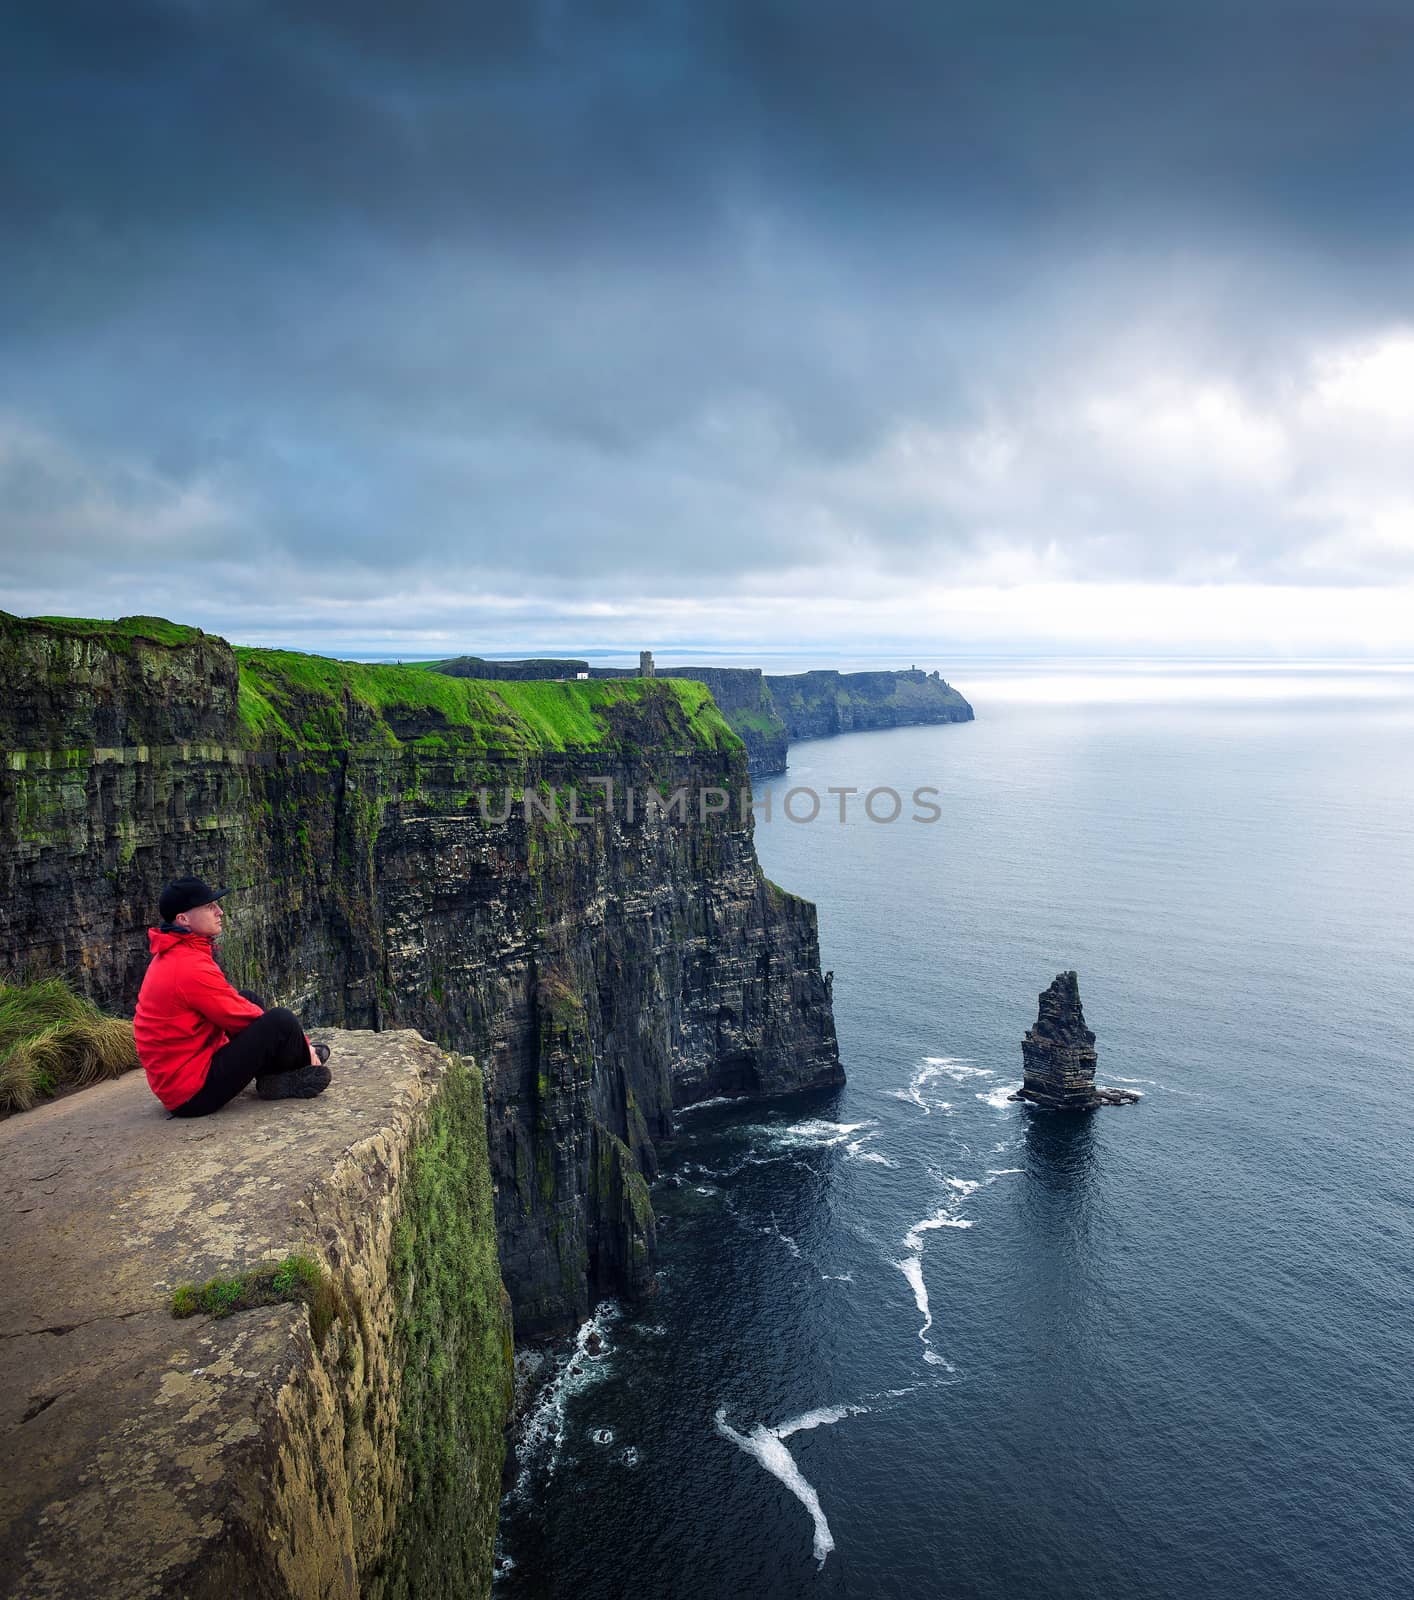 Hiker sitting at the cliffs of Moher located at the edge of the Burren region in County Clare, Ireland.